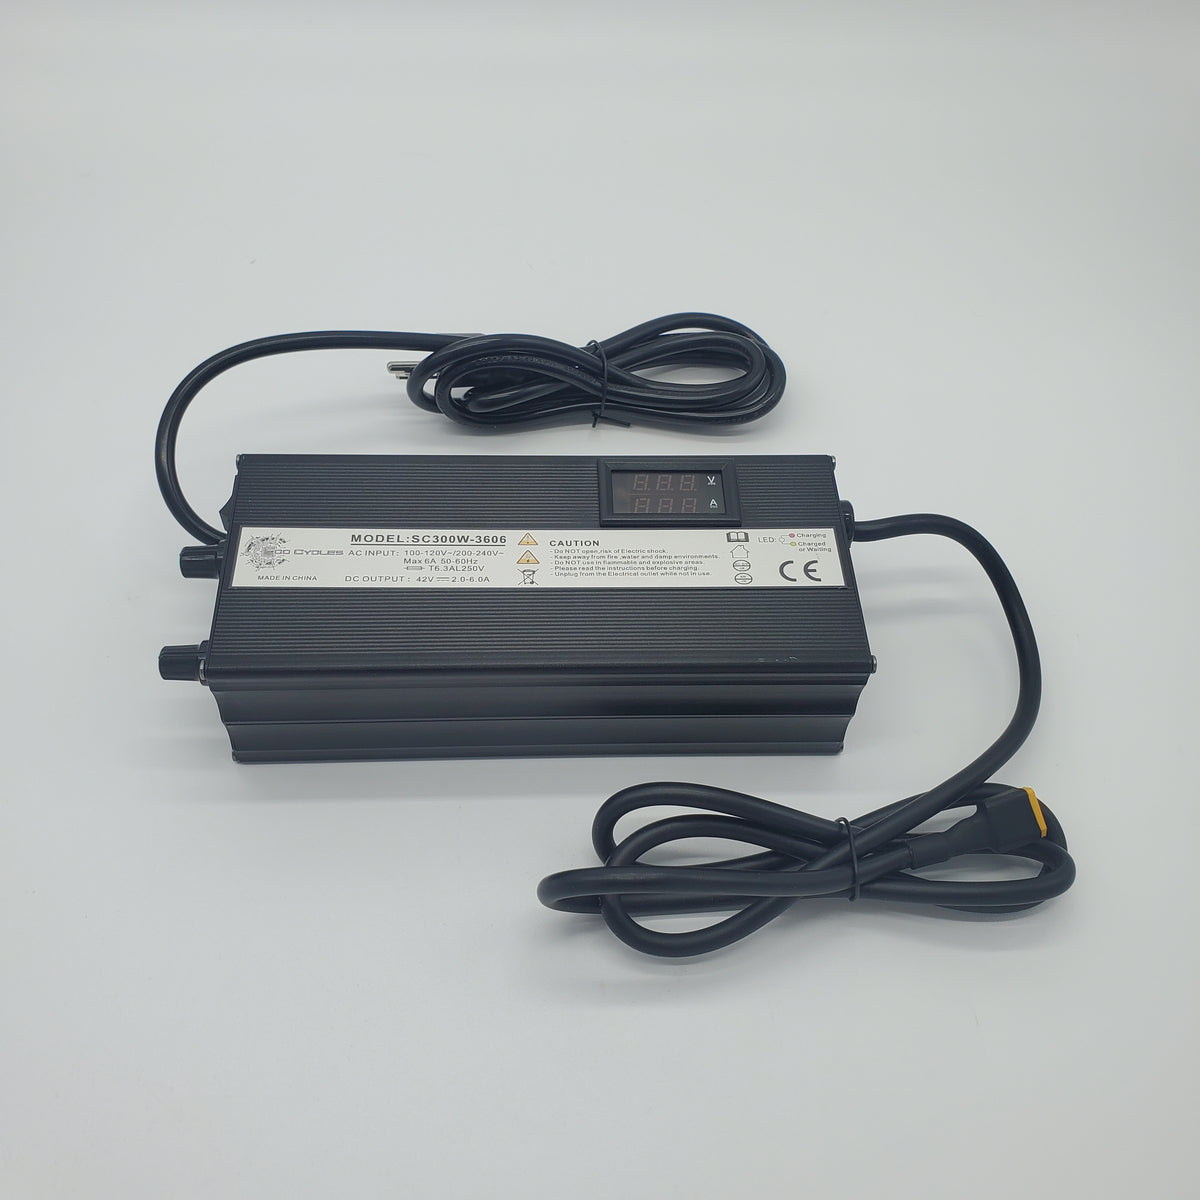 36v Advanced 300w Eco Charger - 2 to 6A - 80/90/100% - w/ Optional Adapters for Universal Use